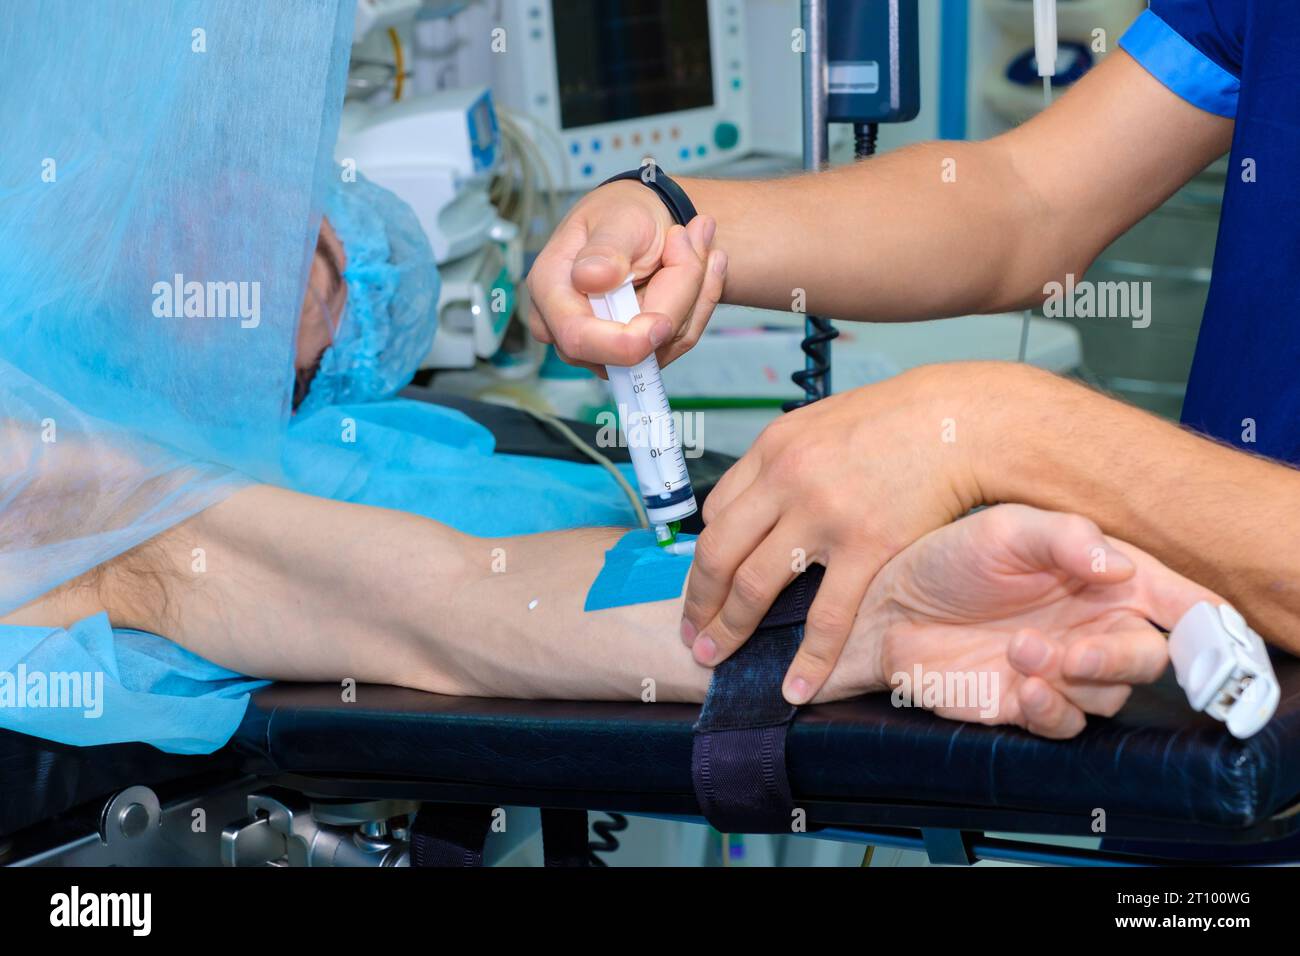 An anesthesiologist injects intravenous anesthesia with a large syringe into the patient's arm on the operating table. Surgery with general anesthesia. Stock Photo